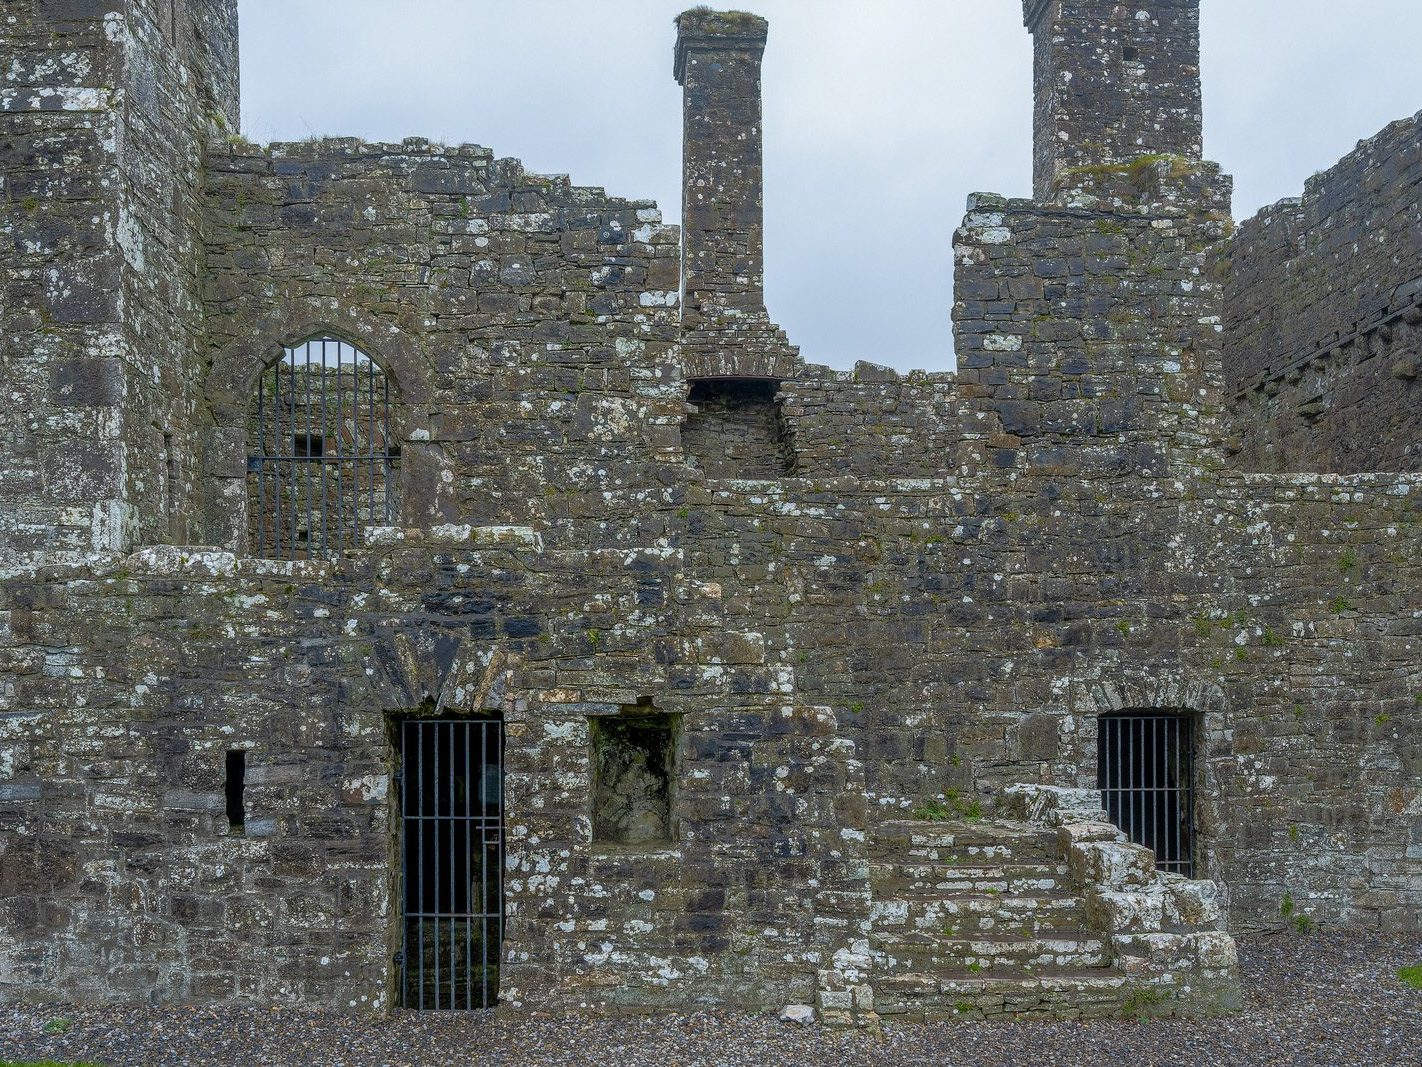 BECTIVE ABBEY WHICH I VISITED LAST CHRISTMAS [THERE WERE NO OTHER VISITORS AS IT WAS A VERY WET DAY]--225258-1